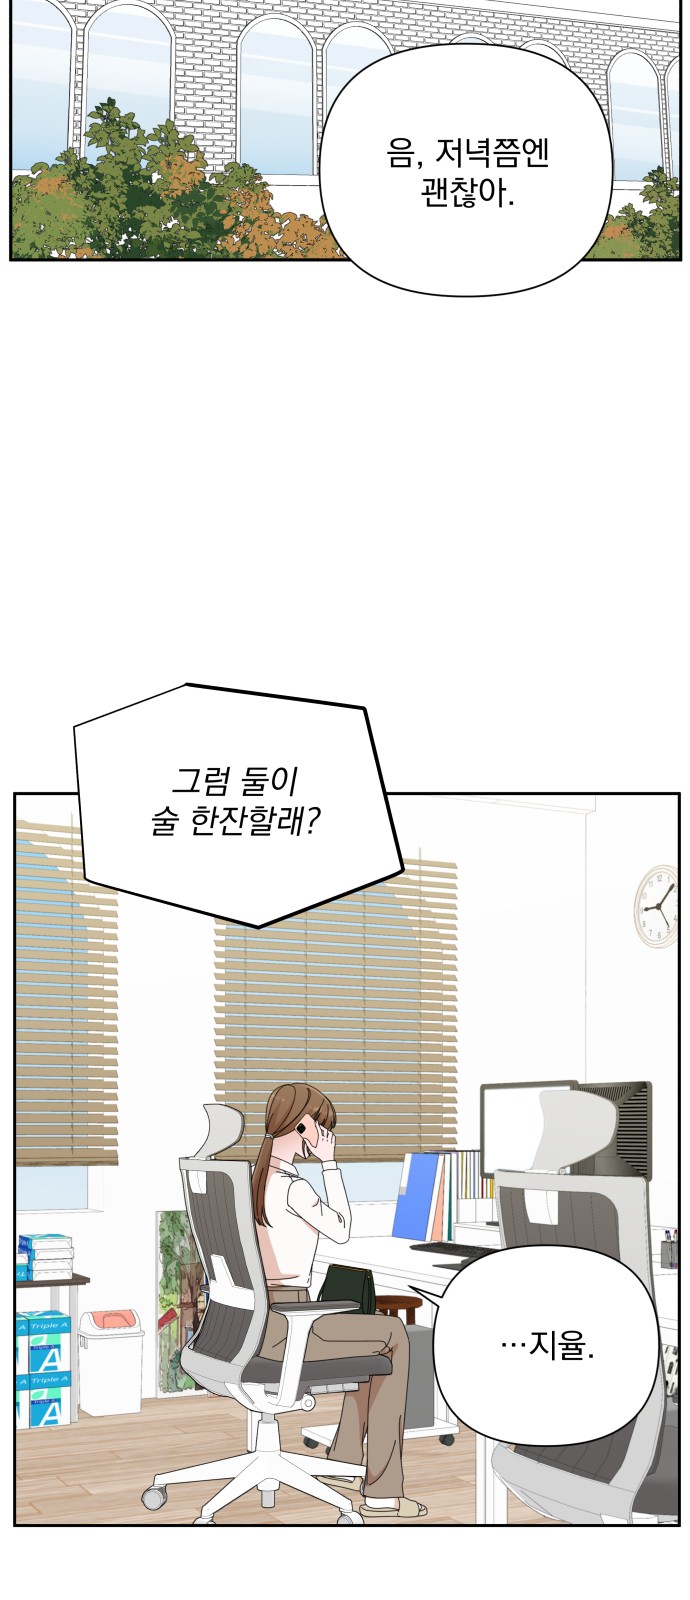 The Man With Pretty Lips - Chapter 42 - Page 2